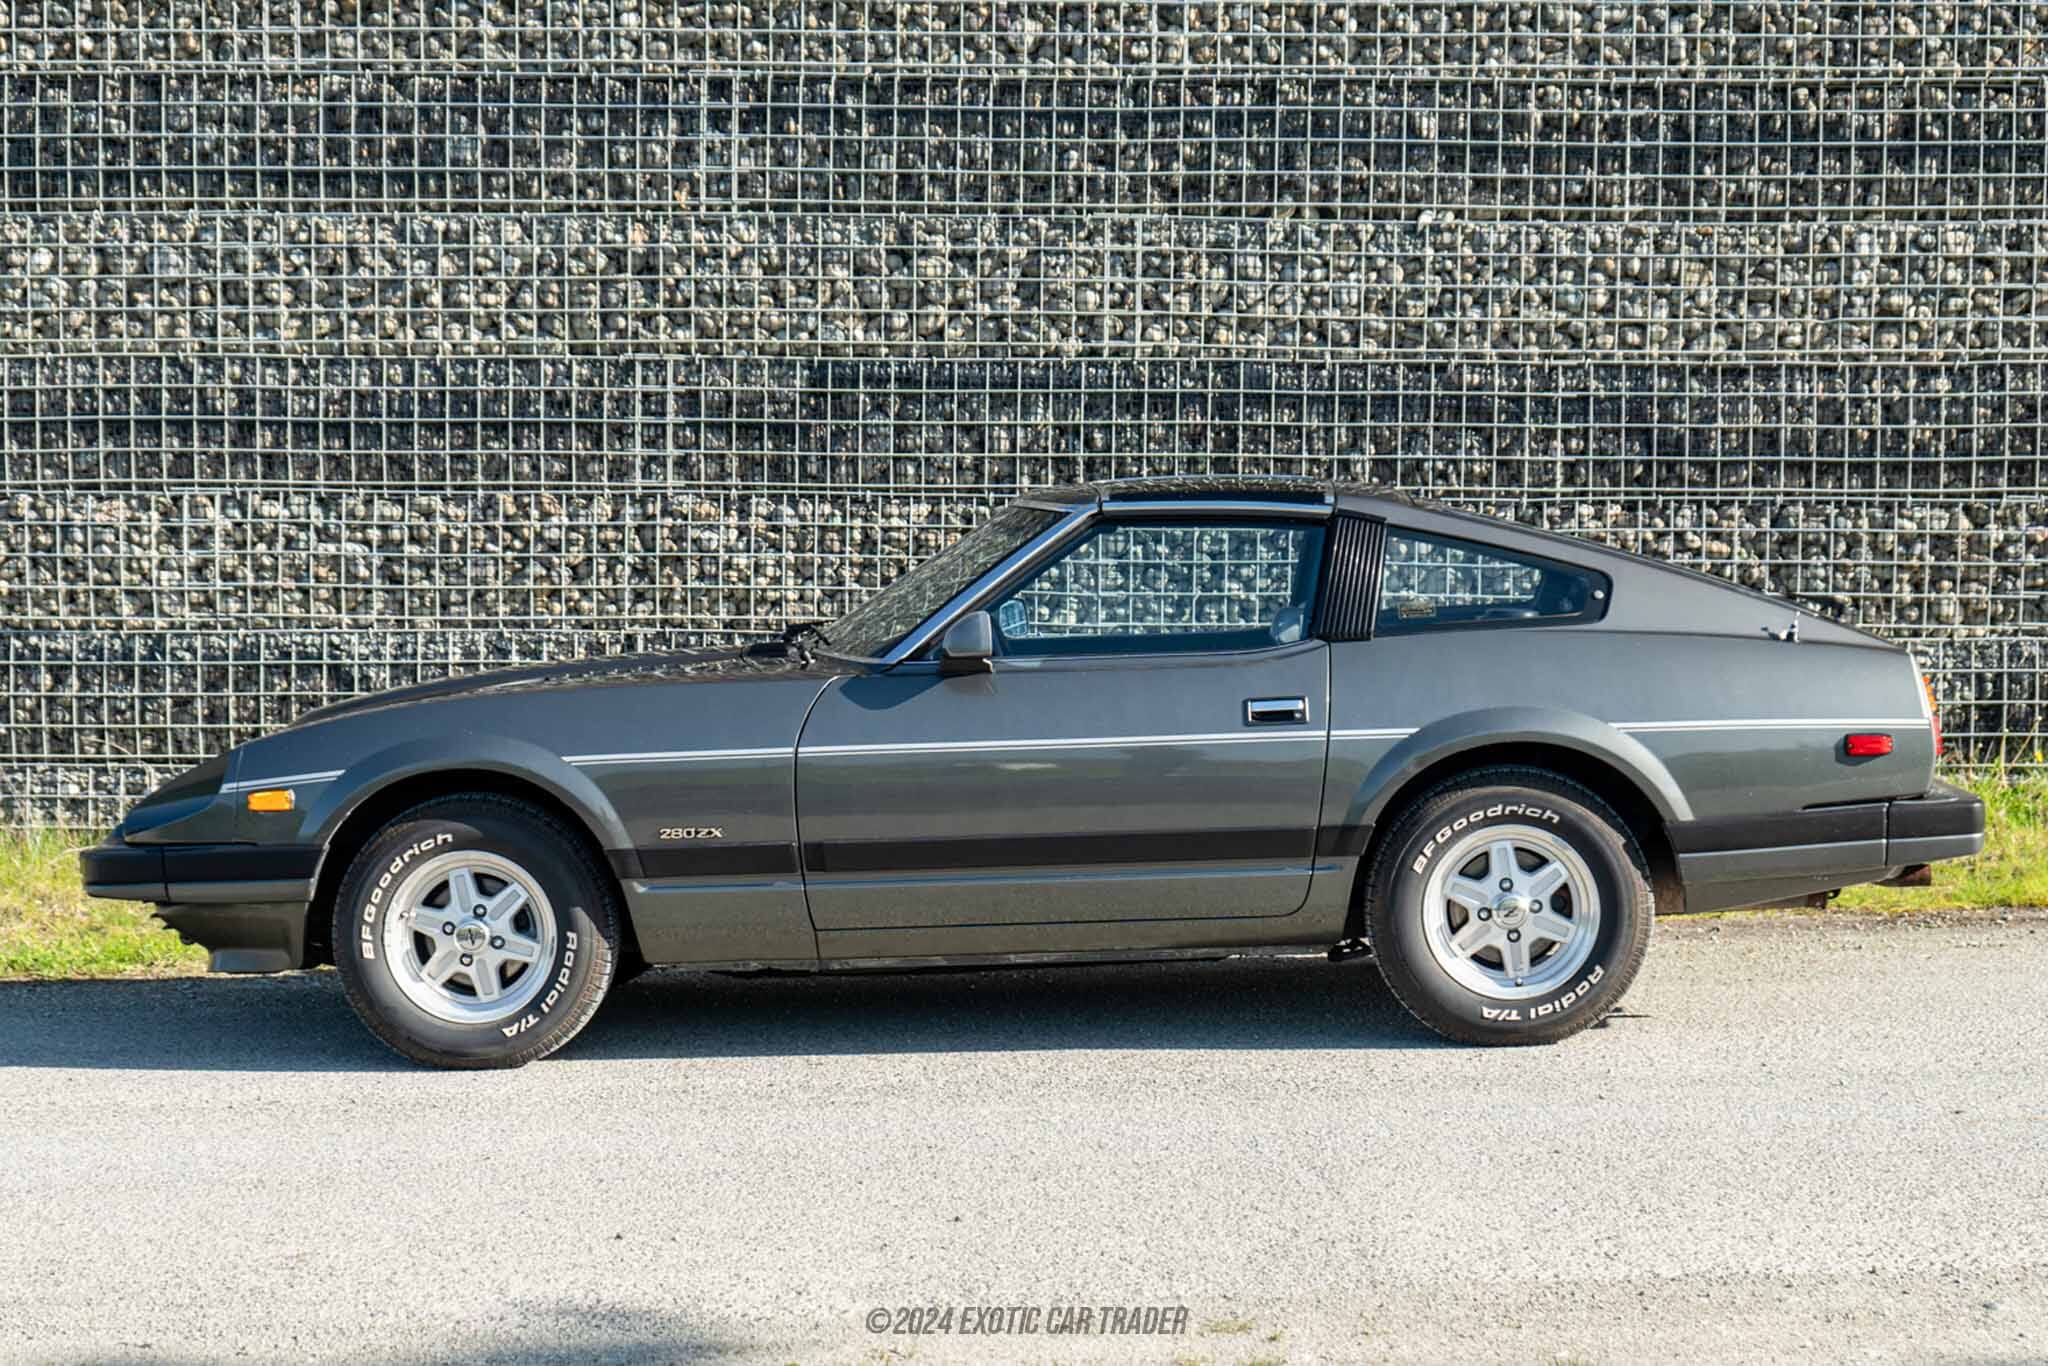 1982 Datsun 280ZX GL for Sale | Exotic Car Trader (Lot #240515958)